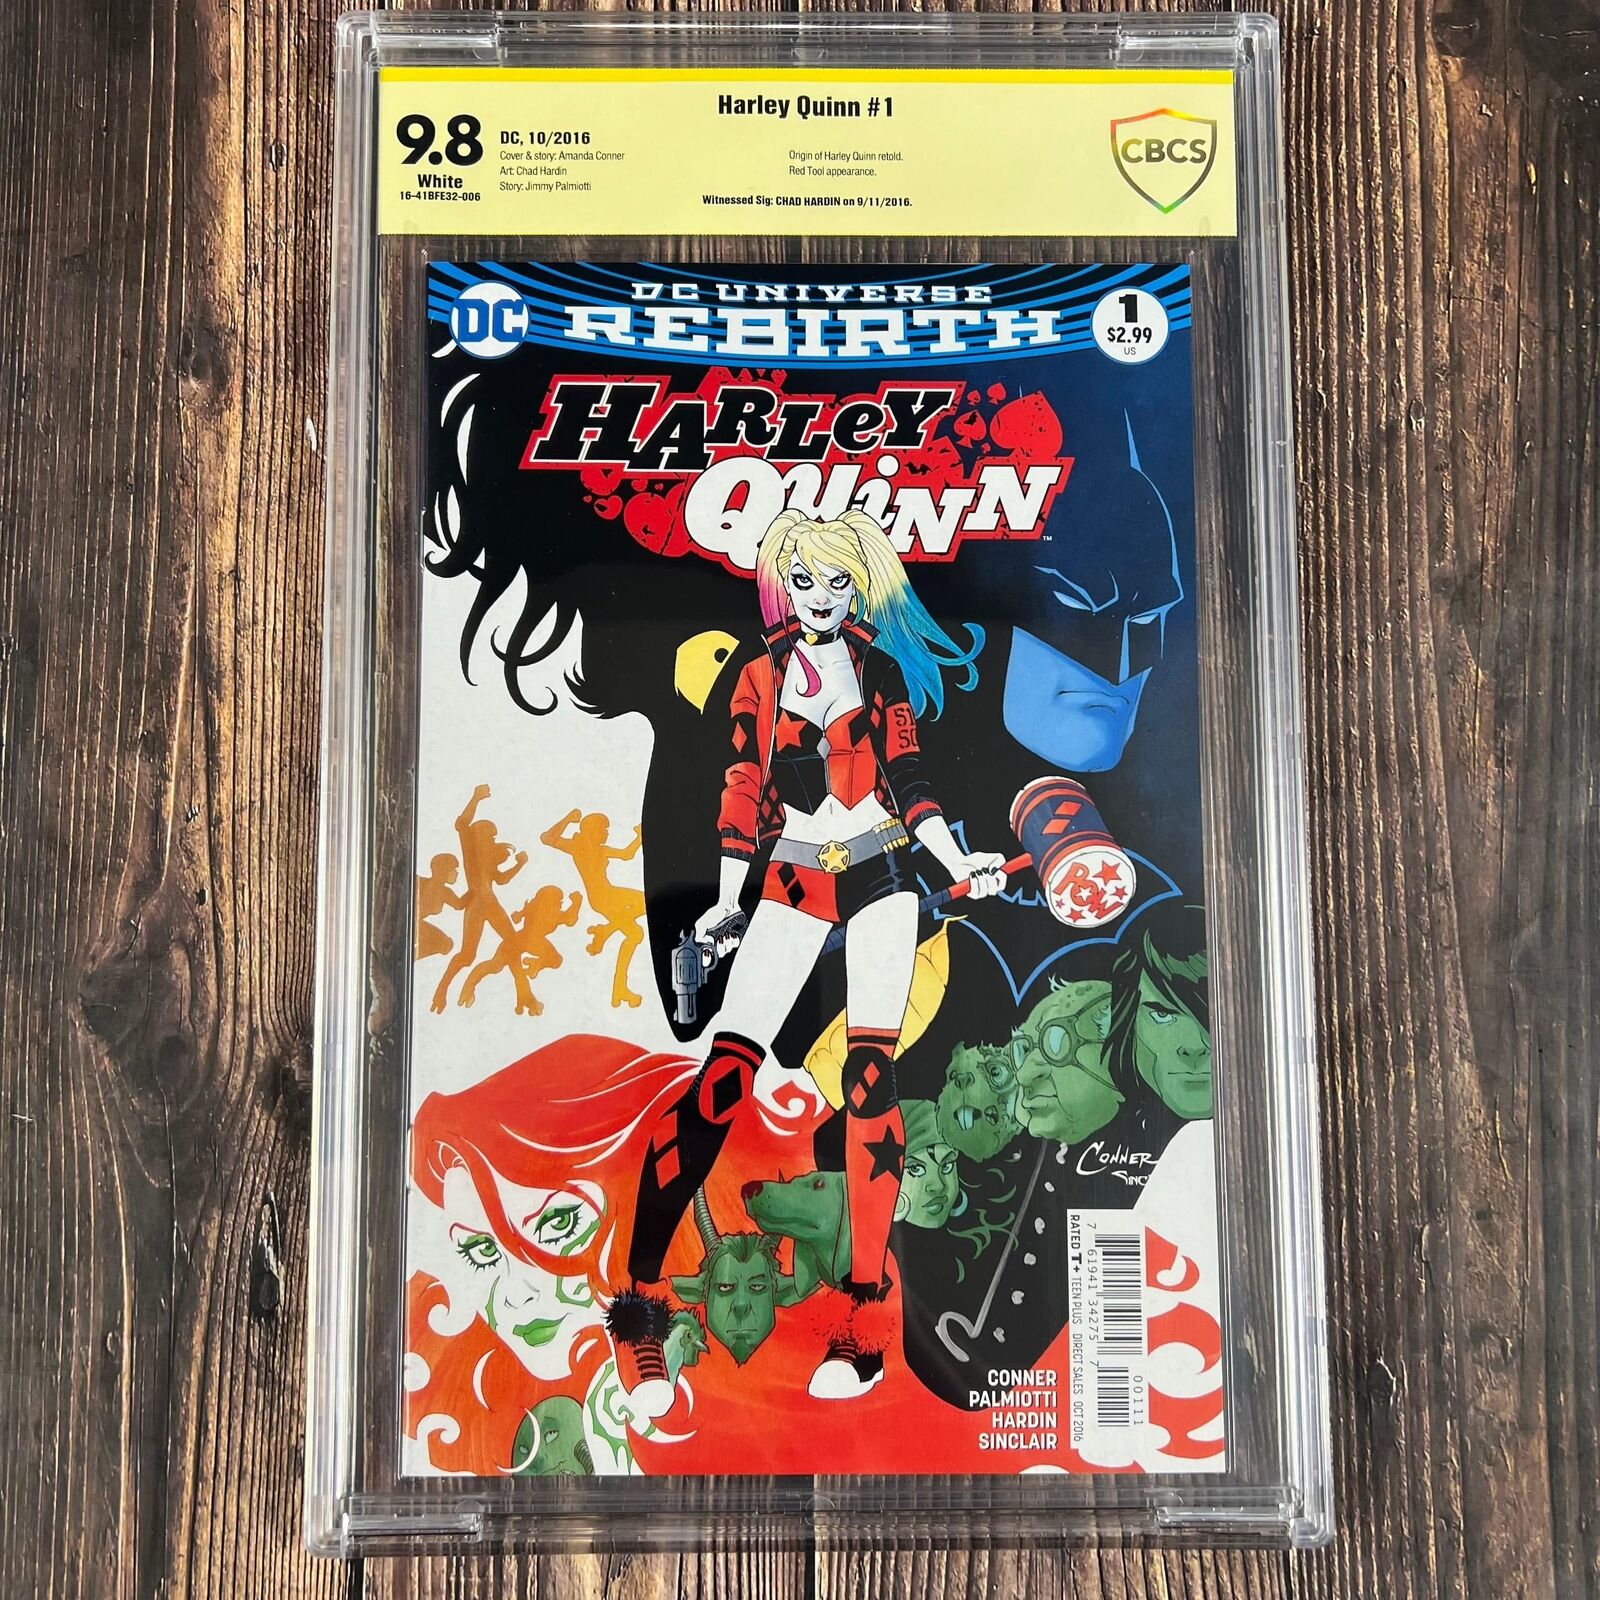 Harley Quinn #1 CBCS 9.8 Signed by Chad Hardin